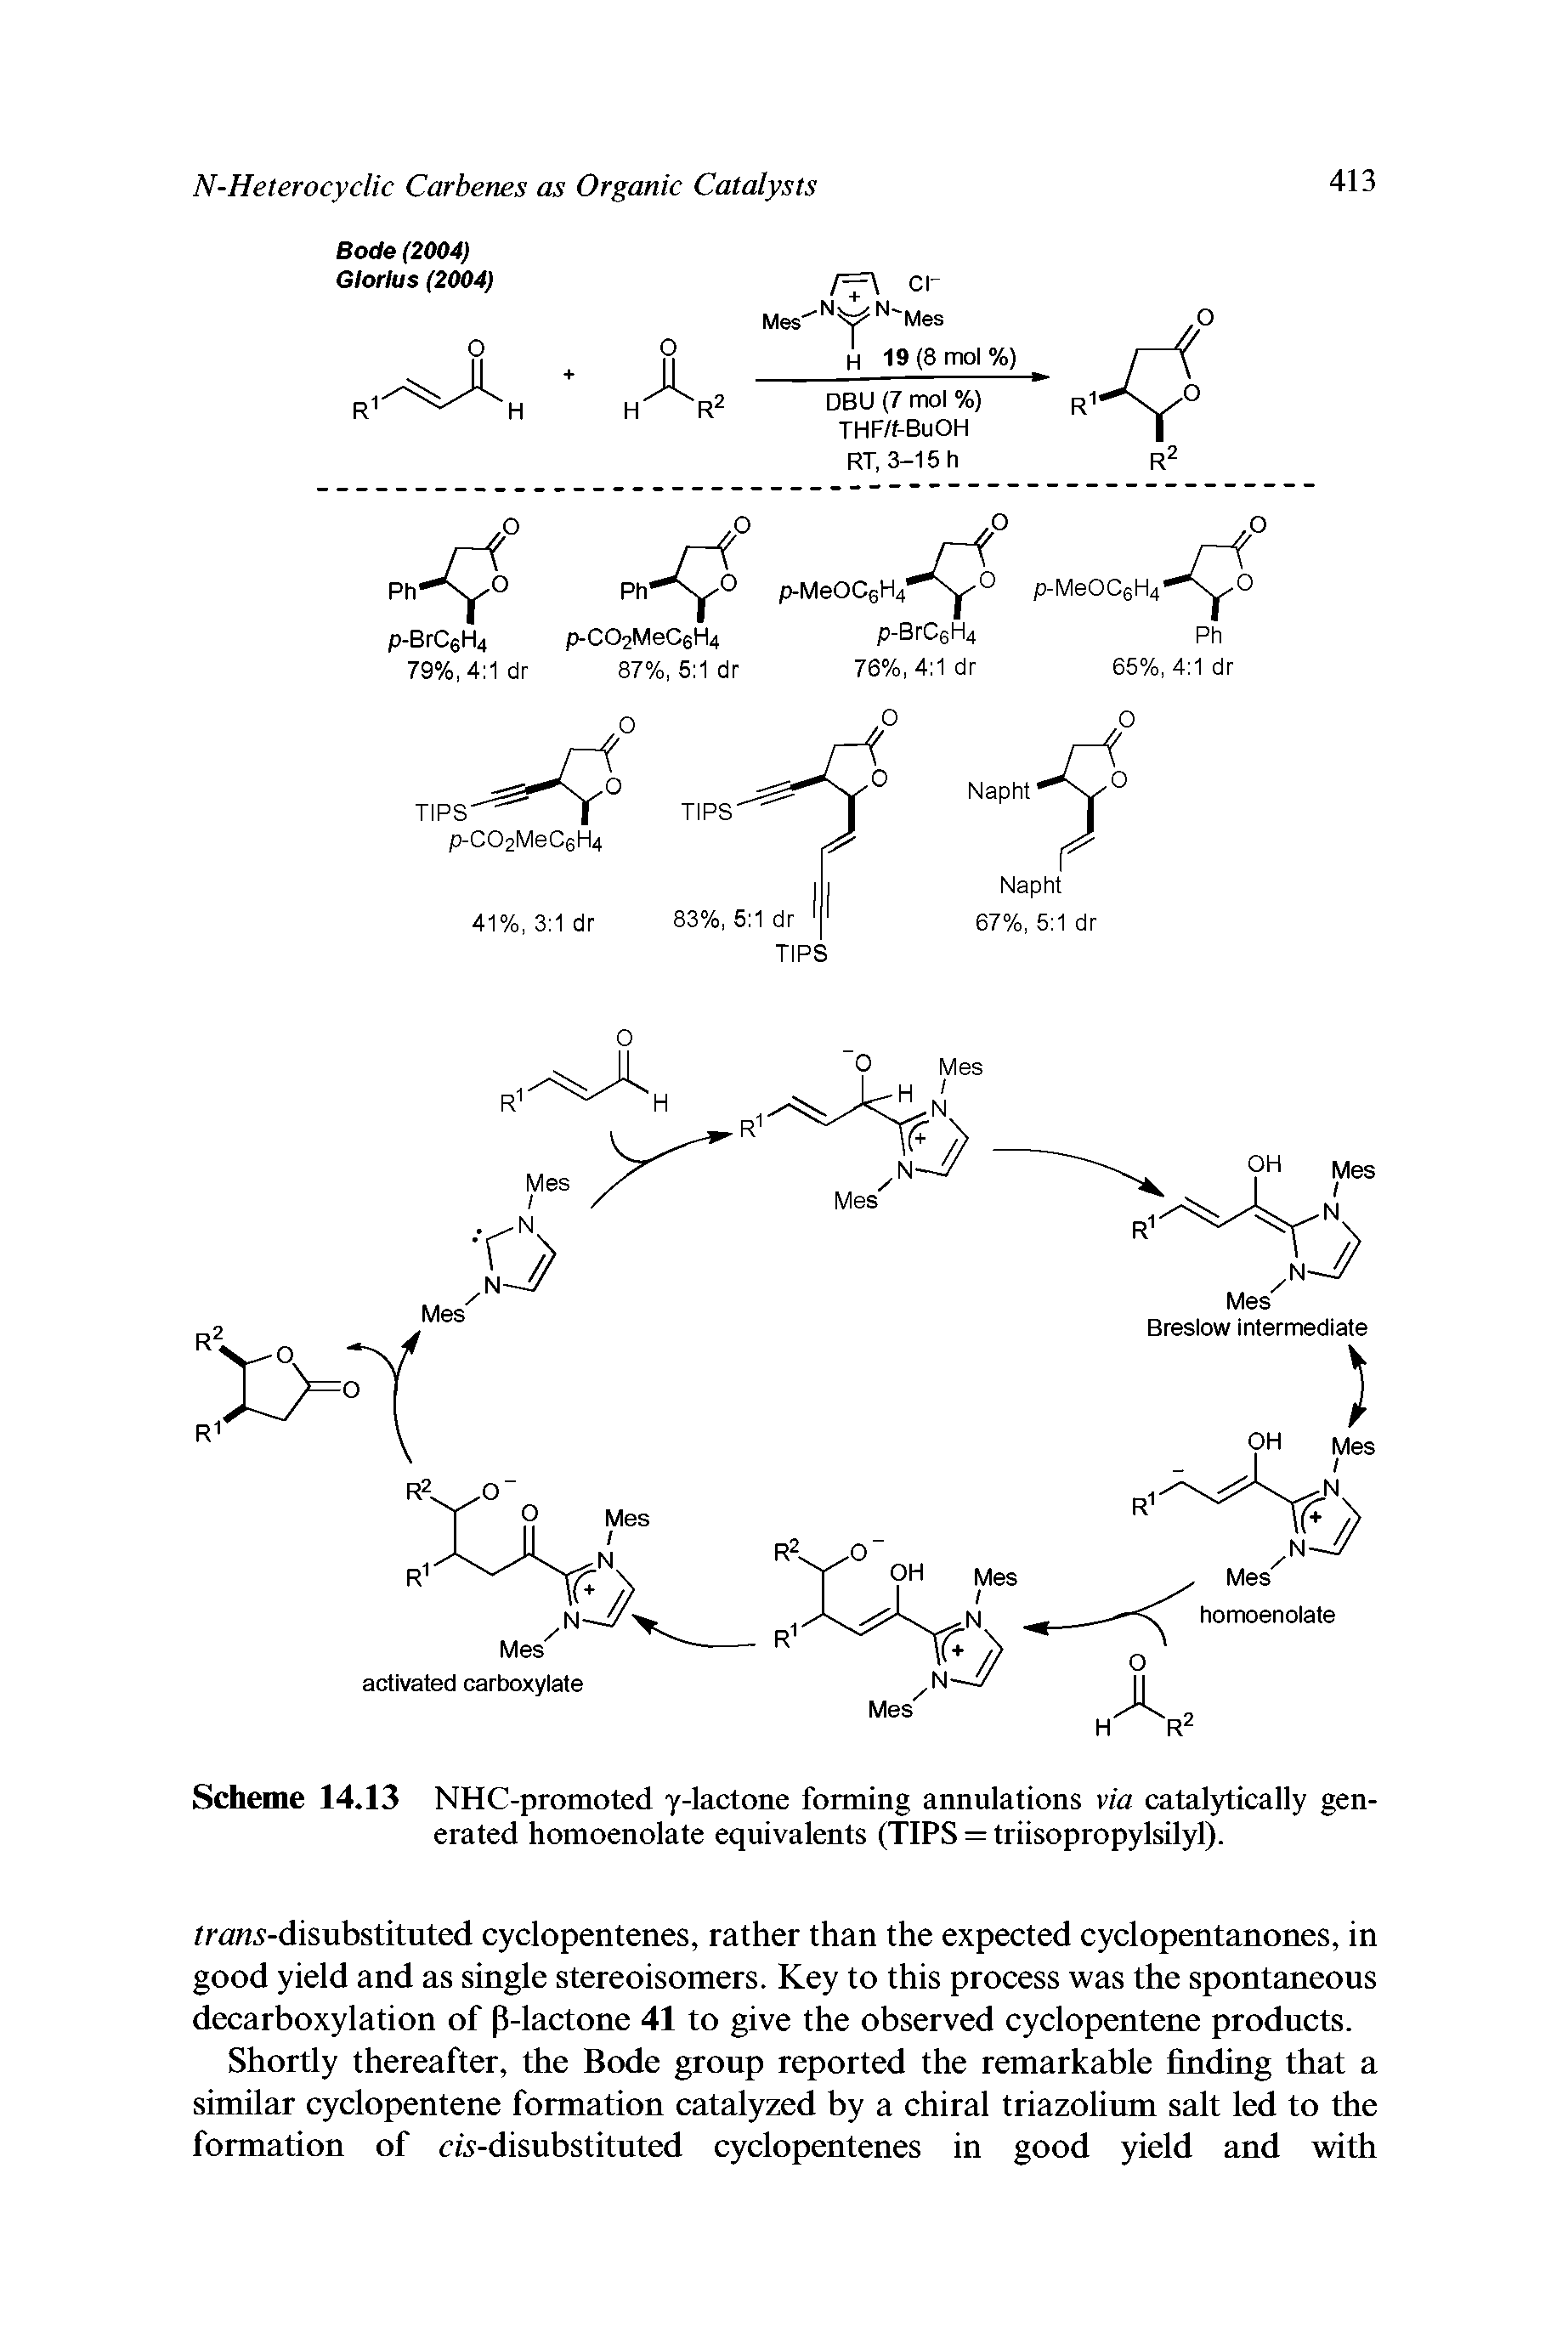 Scheme 14.13 NHC-promoted y-lactone forming annulations via catalytically generated homoenolate equivalents (TIPS = triisopropylsUyl).